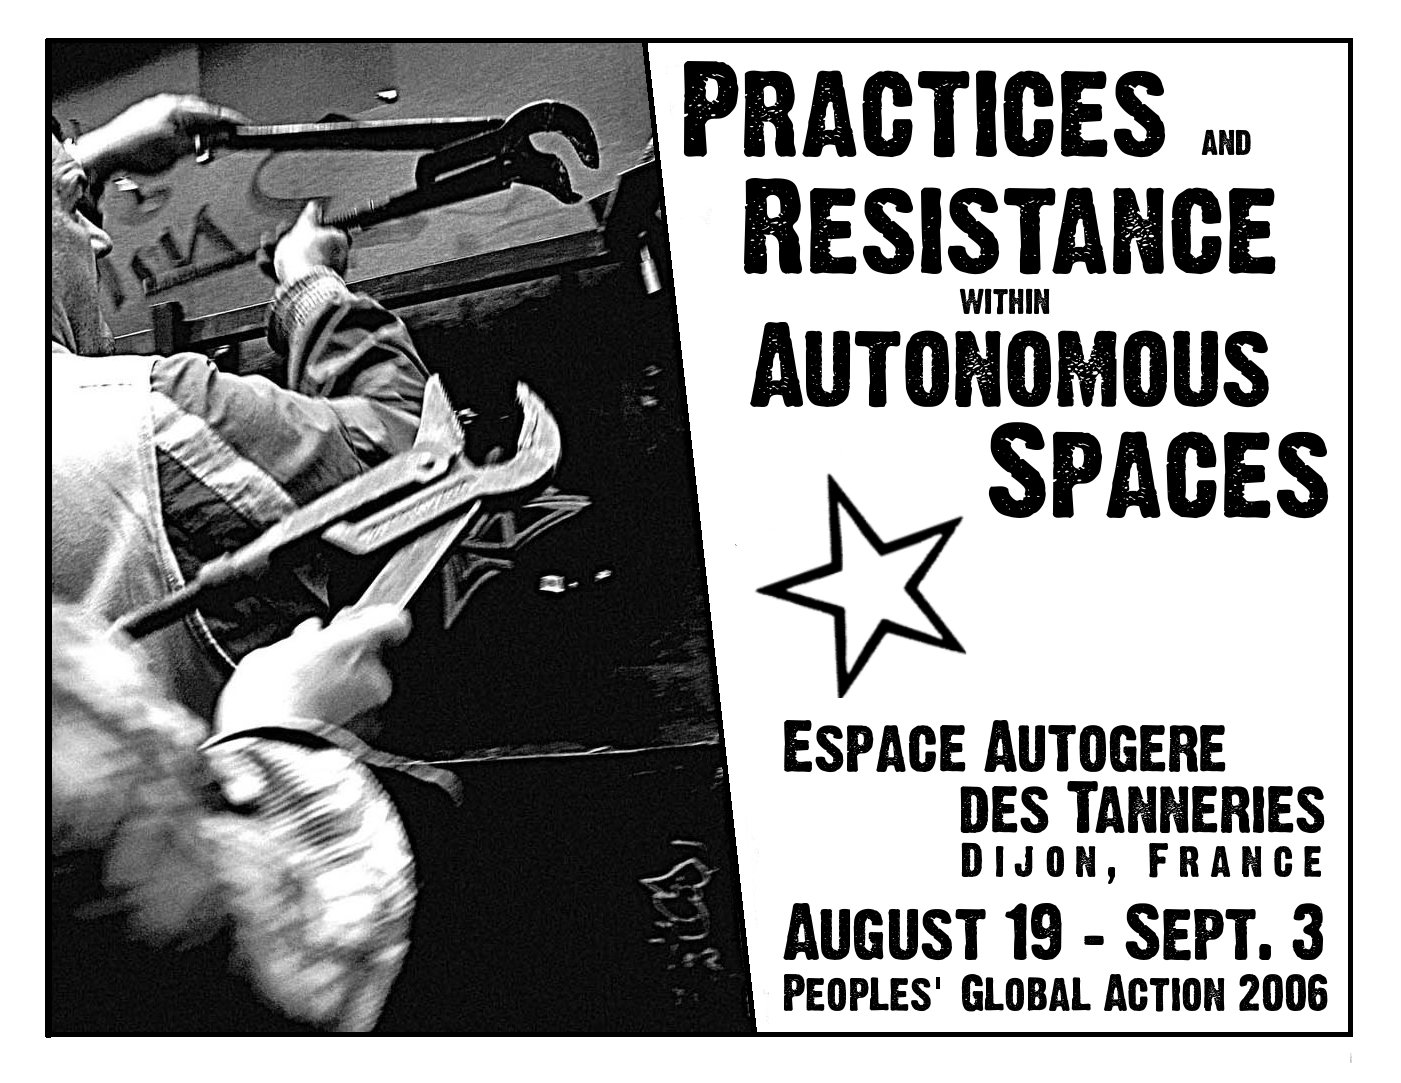 Practices and resistance within Autonomous Spaces